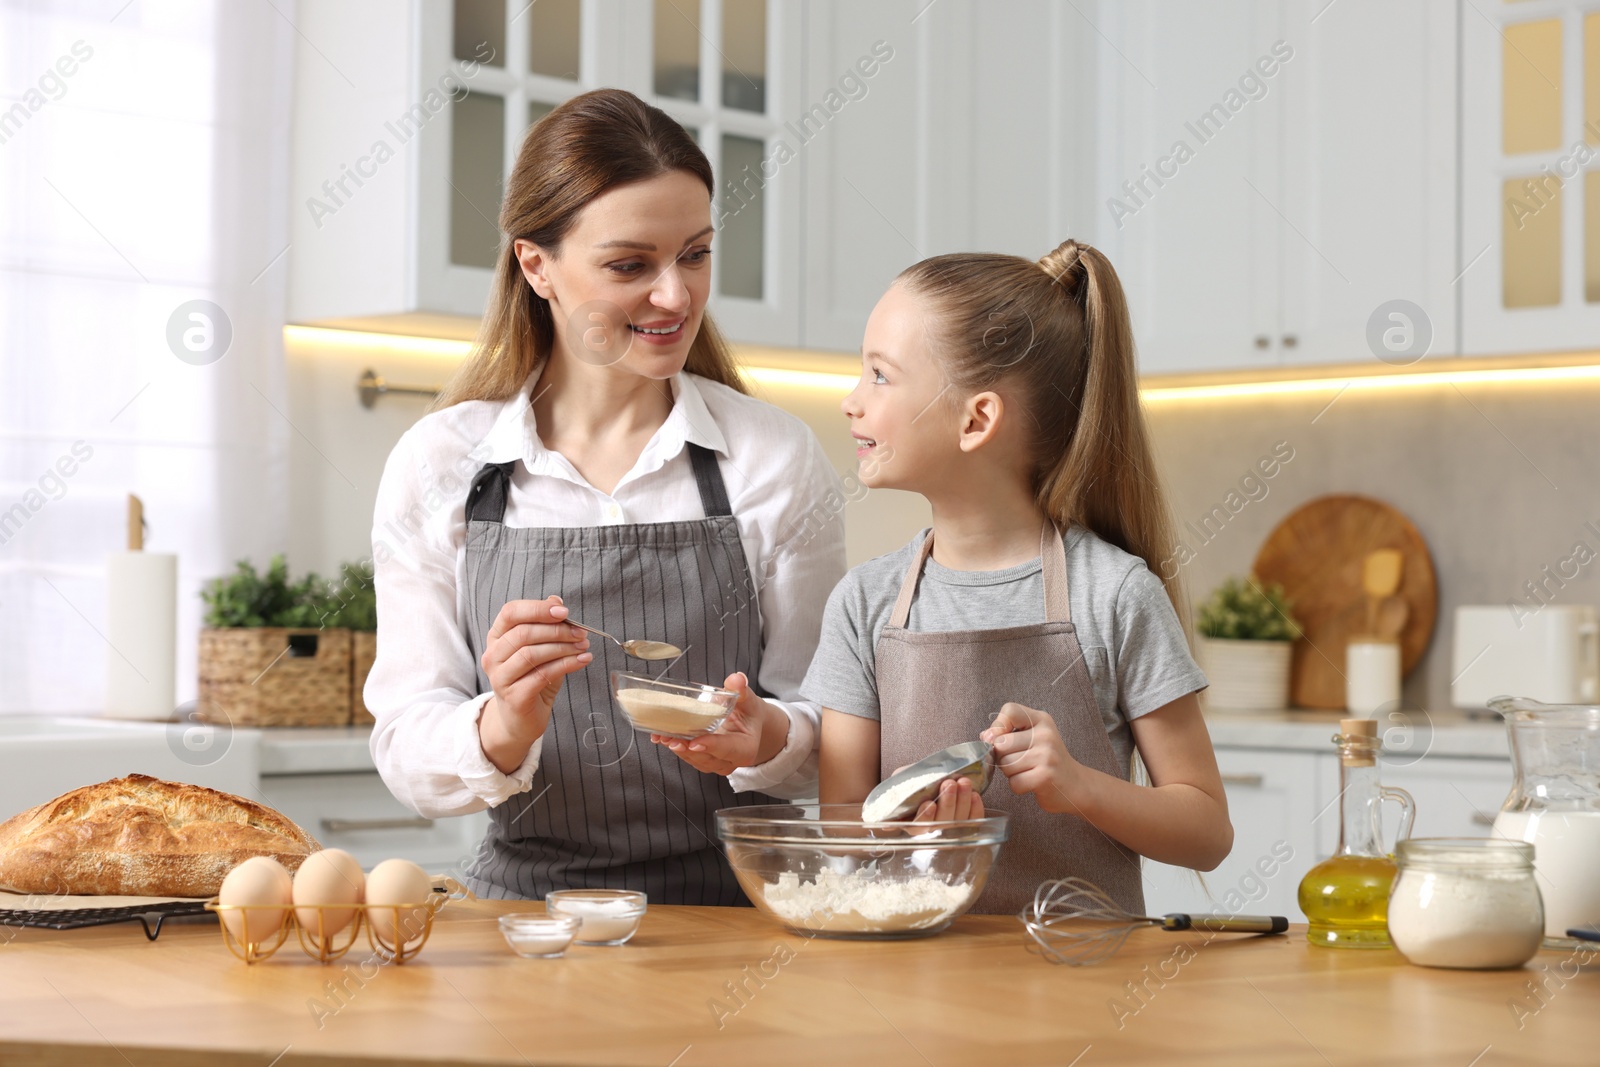 Photo of Making bread. Mother and her daughter putting flour and dry yeast into bowl at wooden table in kitchen